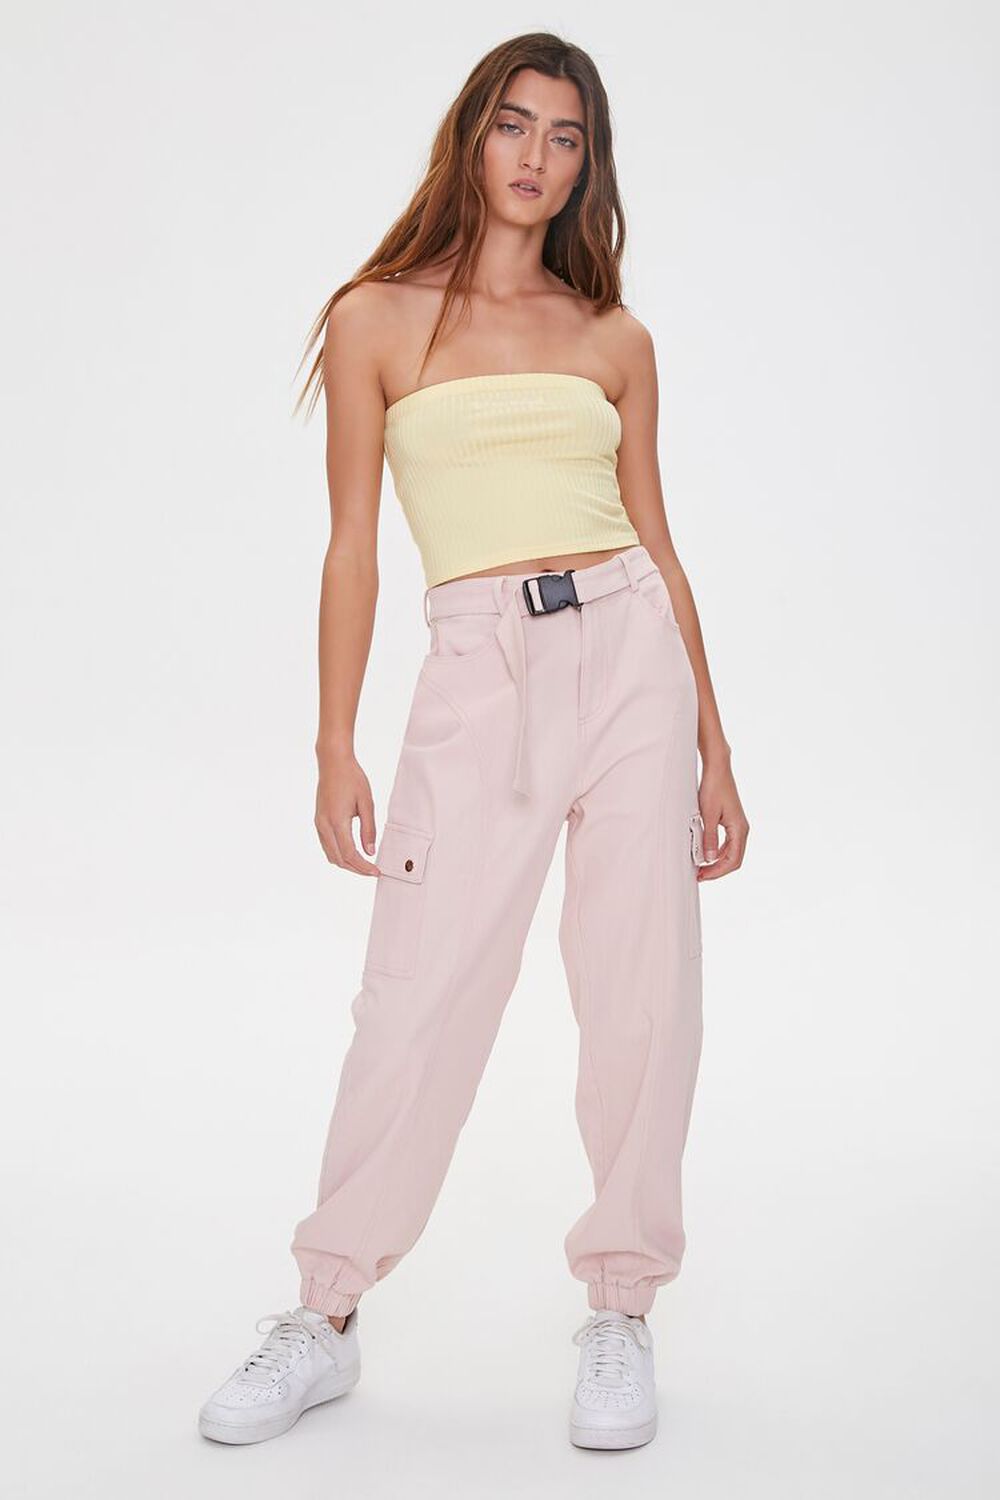 DUSTY PINK Belted Cargo Joggers, image 1